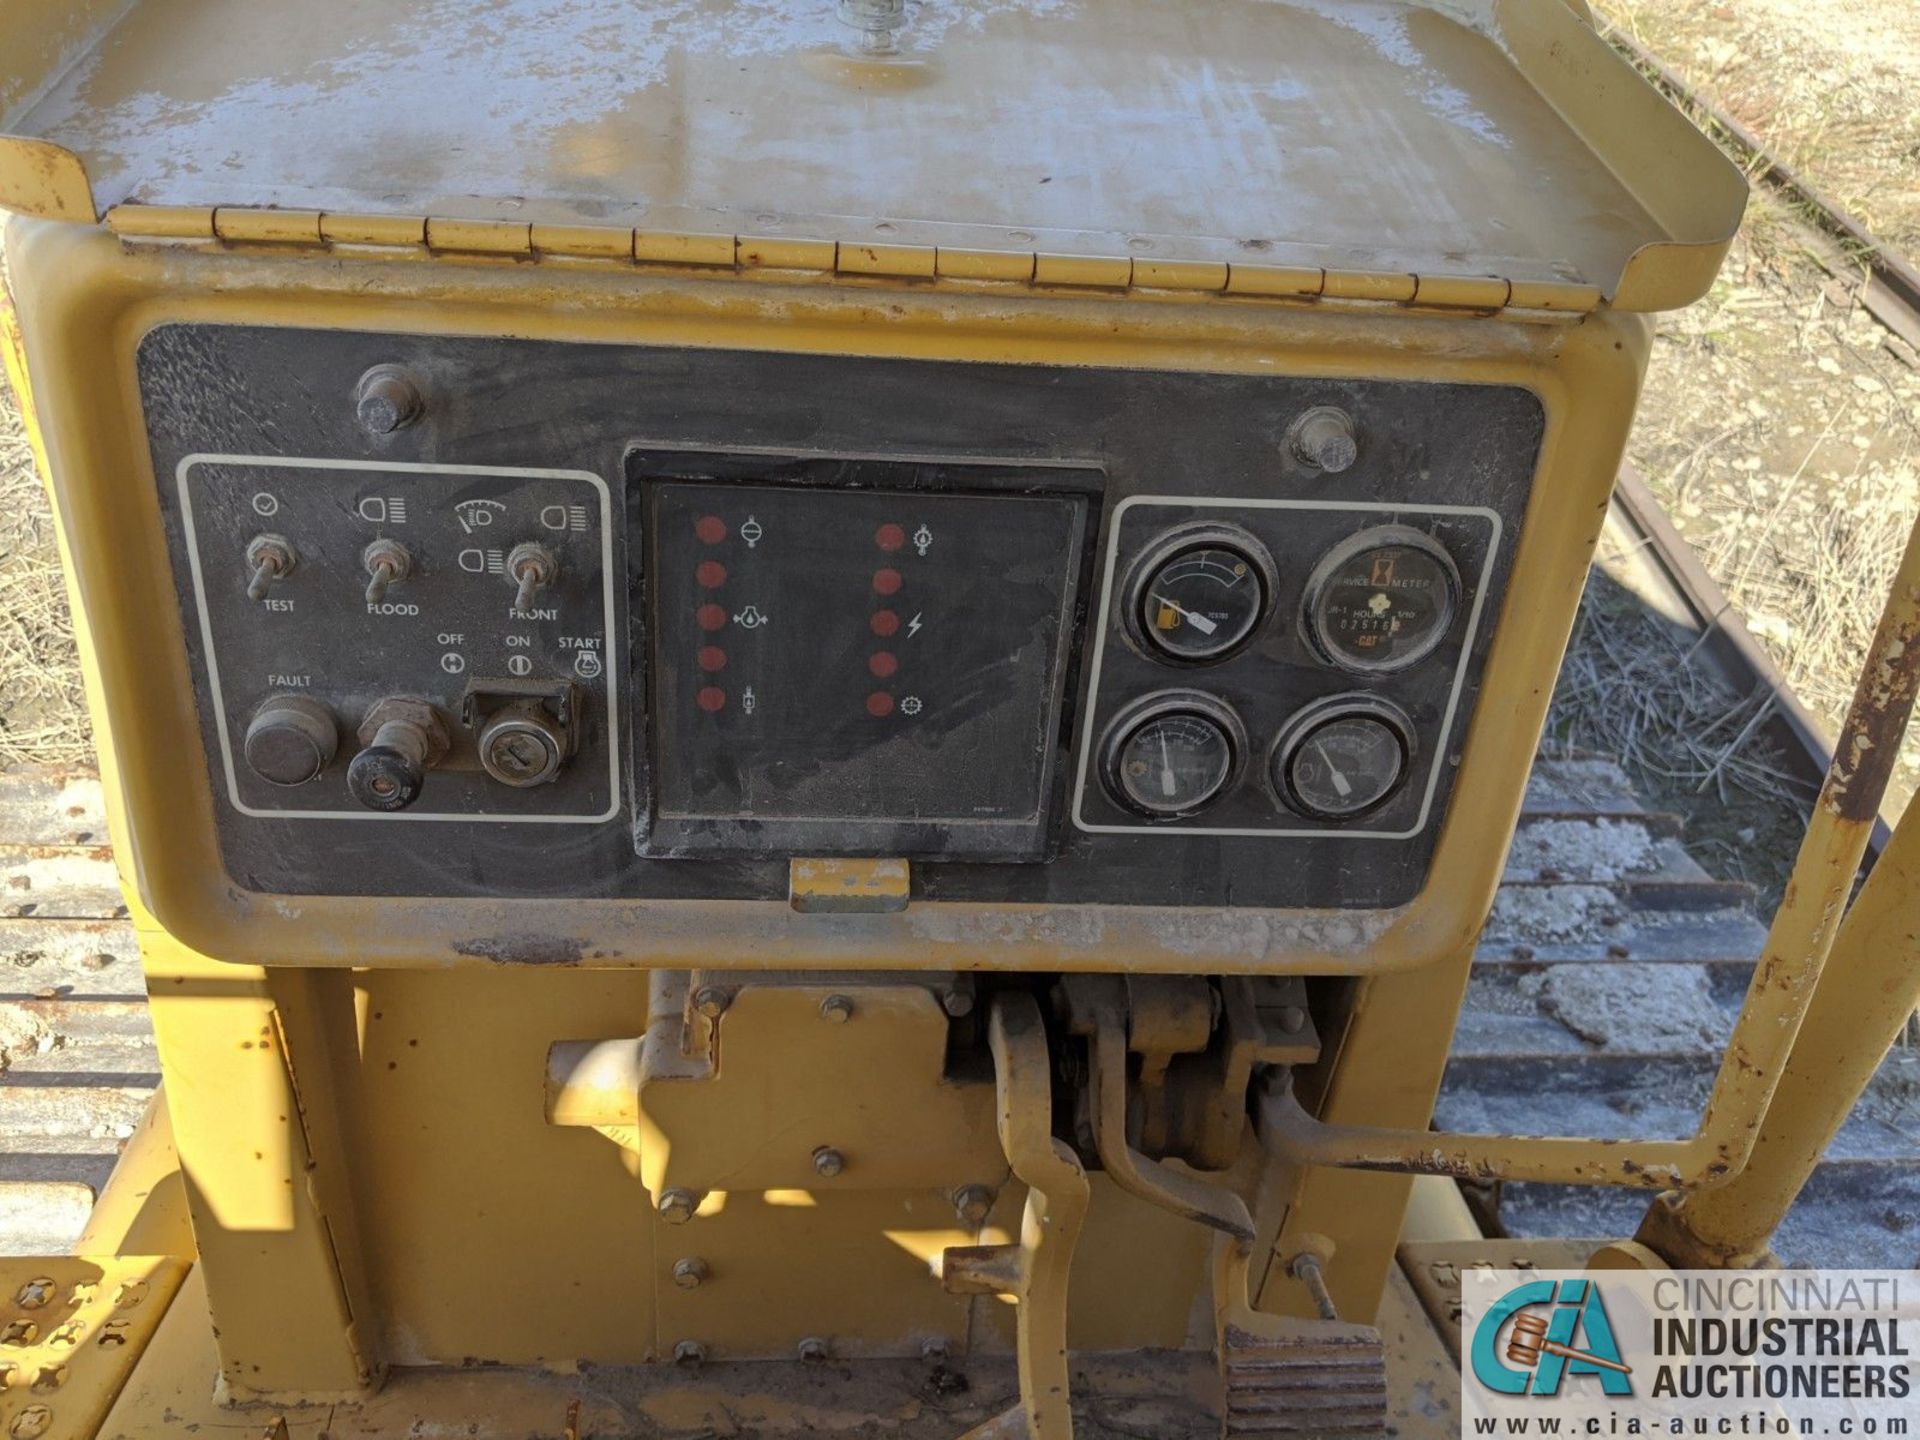 1993 CATERPILLAR MODEL D5H INCLINE TRACK CRAWLER DOZER; S/N 12Z48432, ENGINE NO. 3304, PRODUCT ID - Image 8 of 13